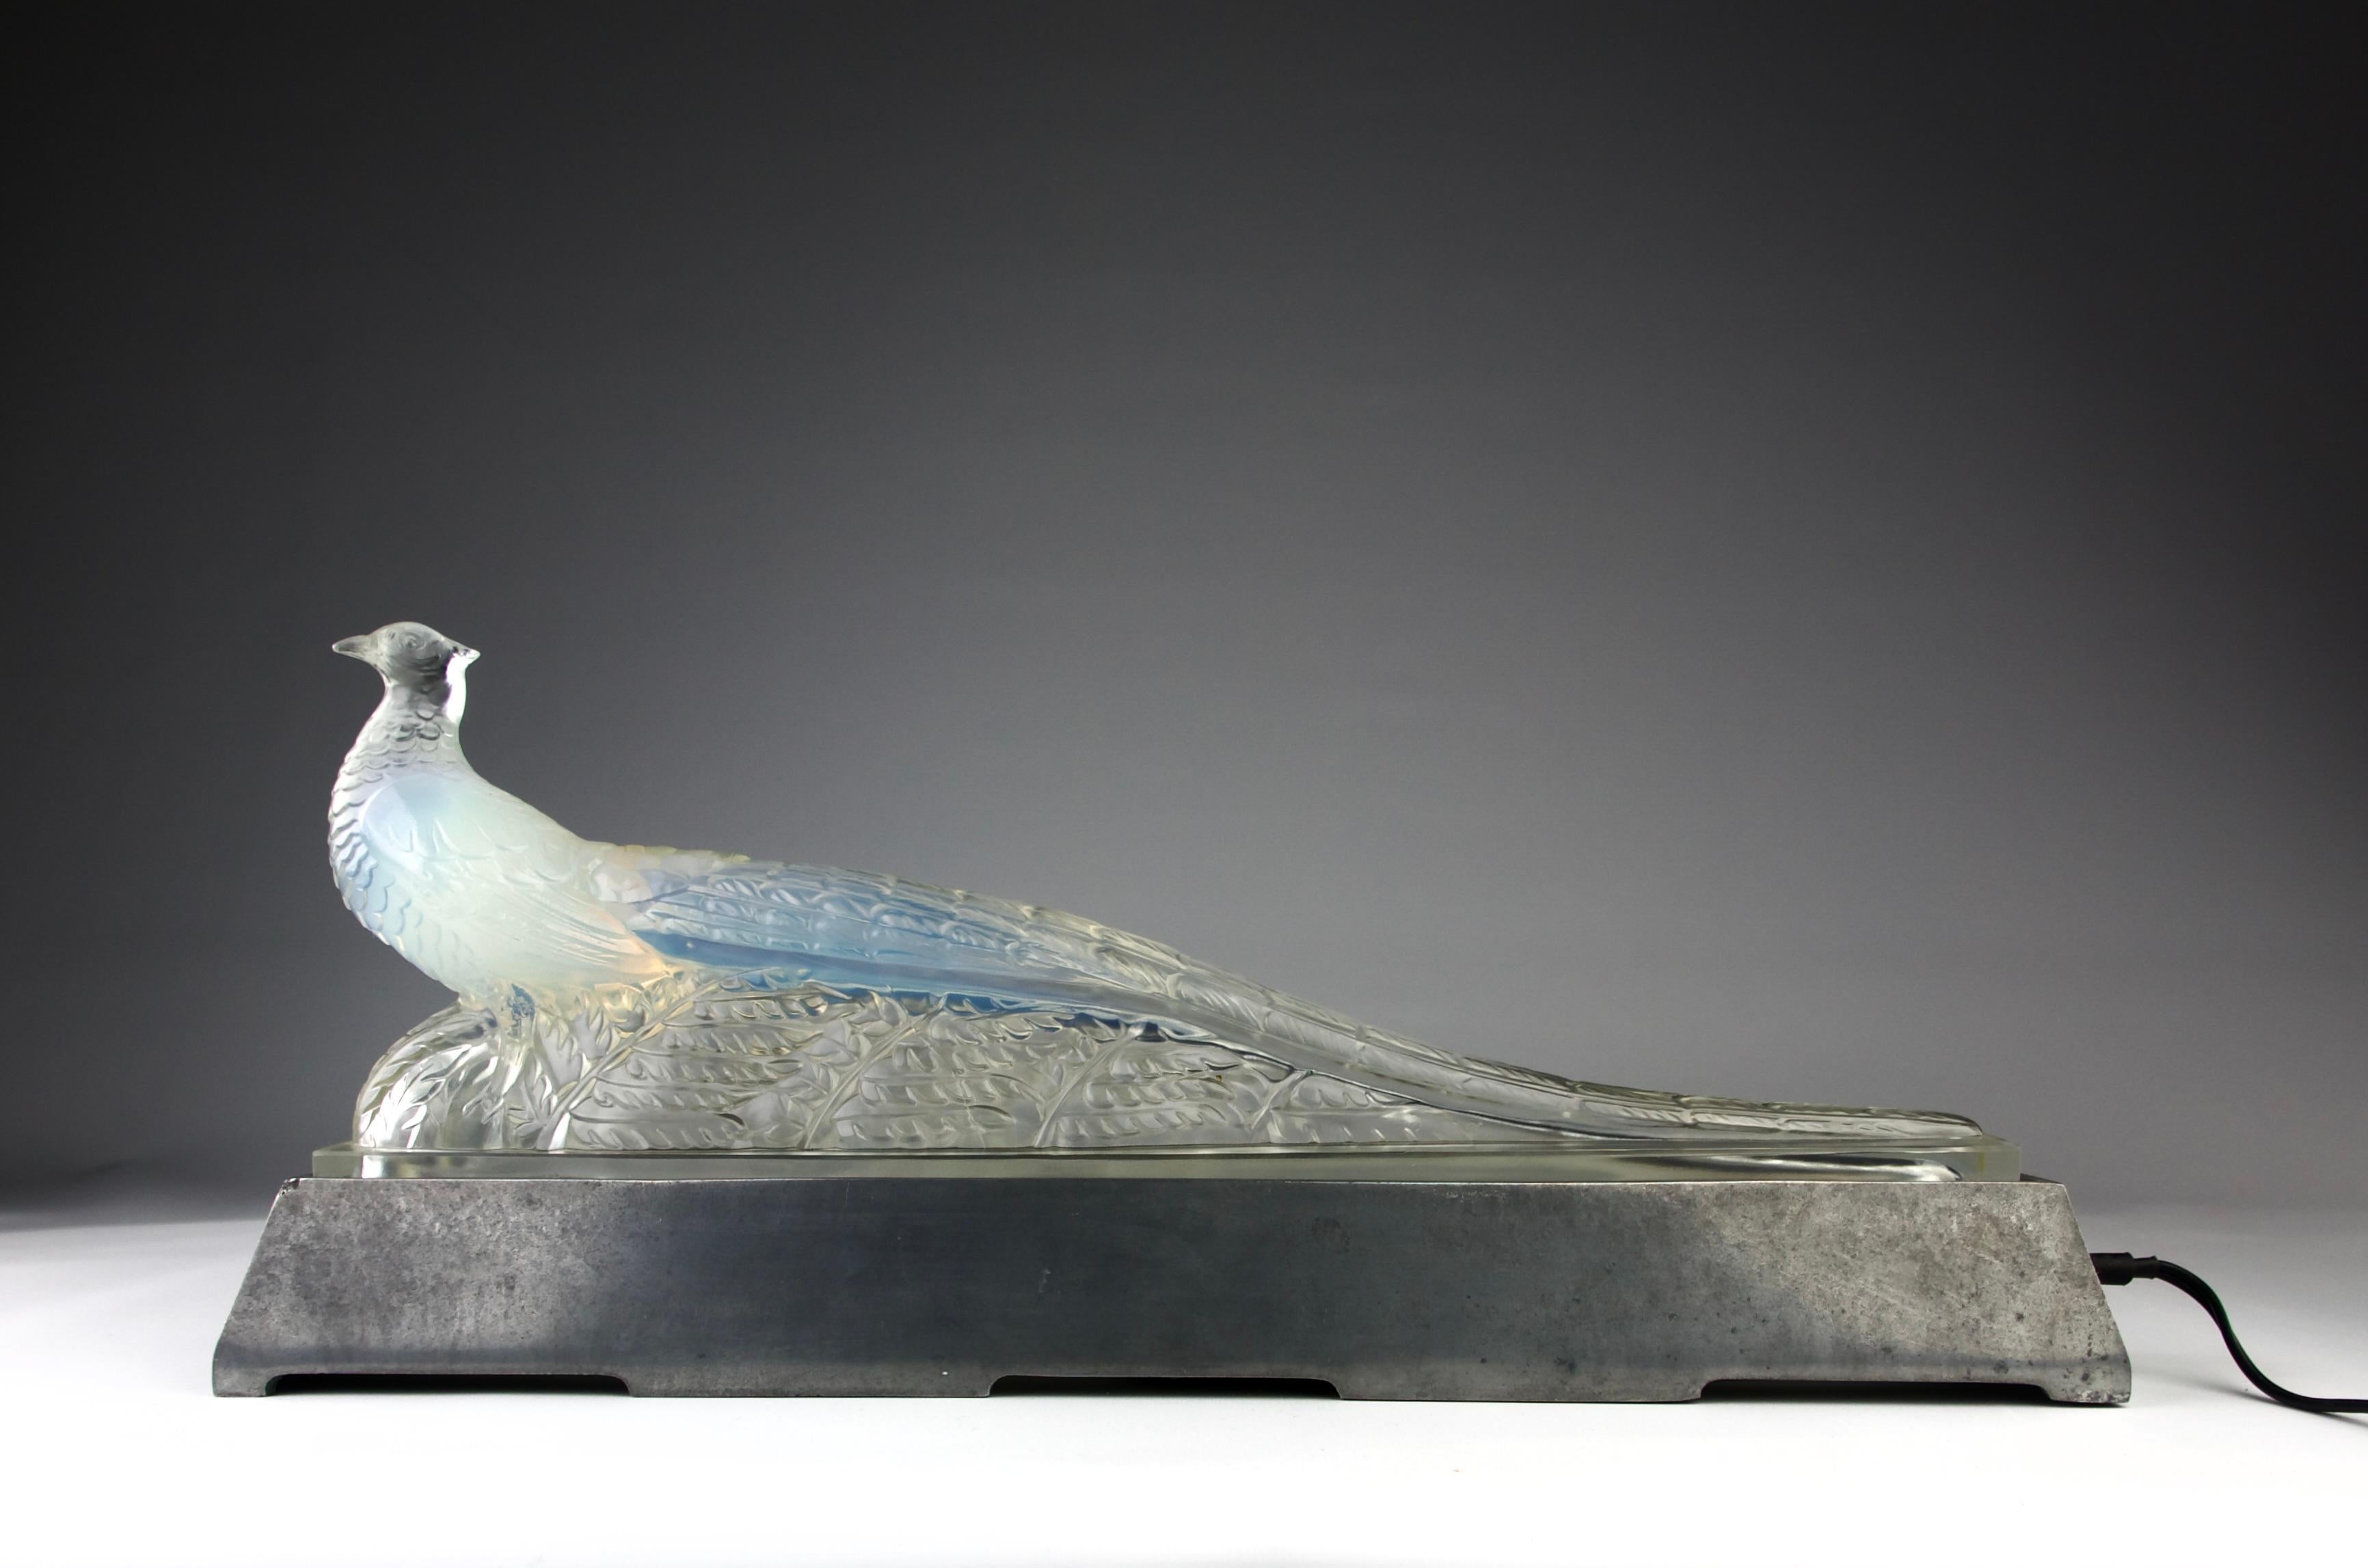 Superb opaline pressed glass Art Deco pheasant lamp by the Verlys manufacture, 1920s Art Deco France.

Dimensions in cm ( H x L x l ) : 20.5 x 46 x 9.5

VERLYS (1925-1946) is associated with the Holophane company (glassworks of Les Andelys -